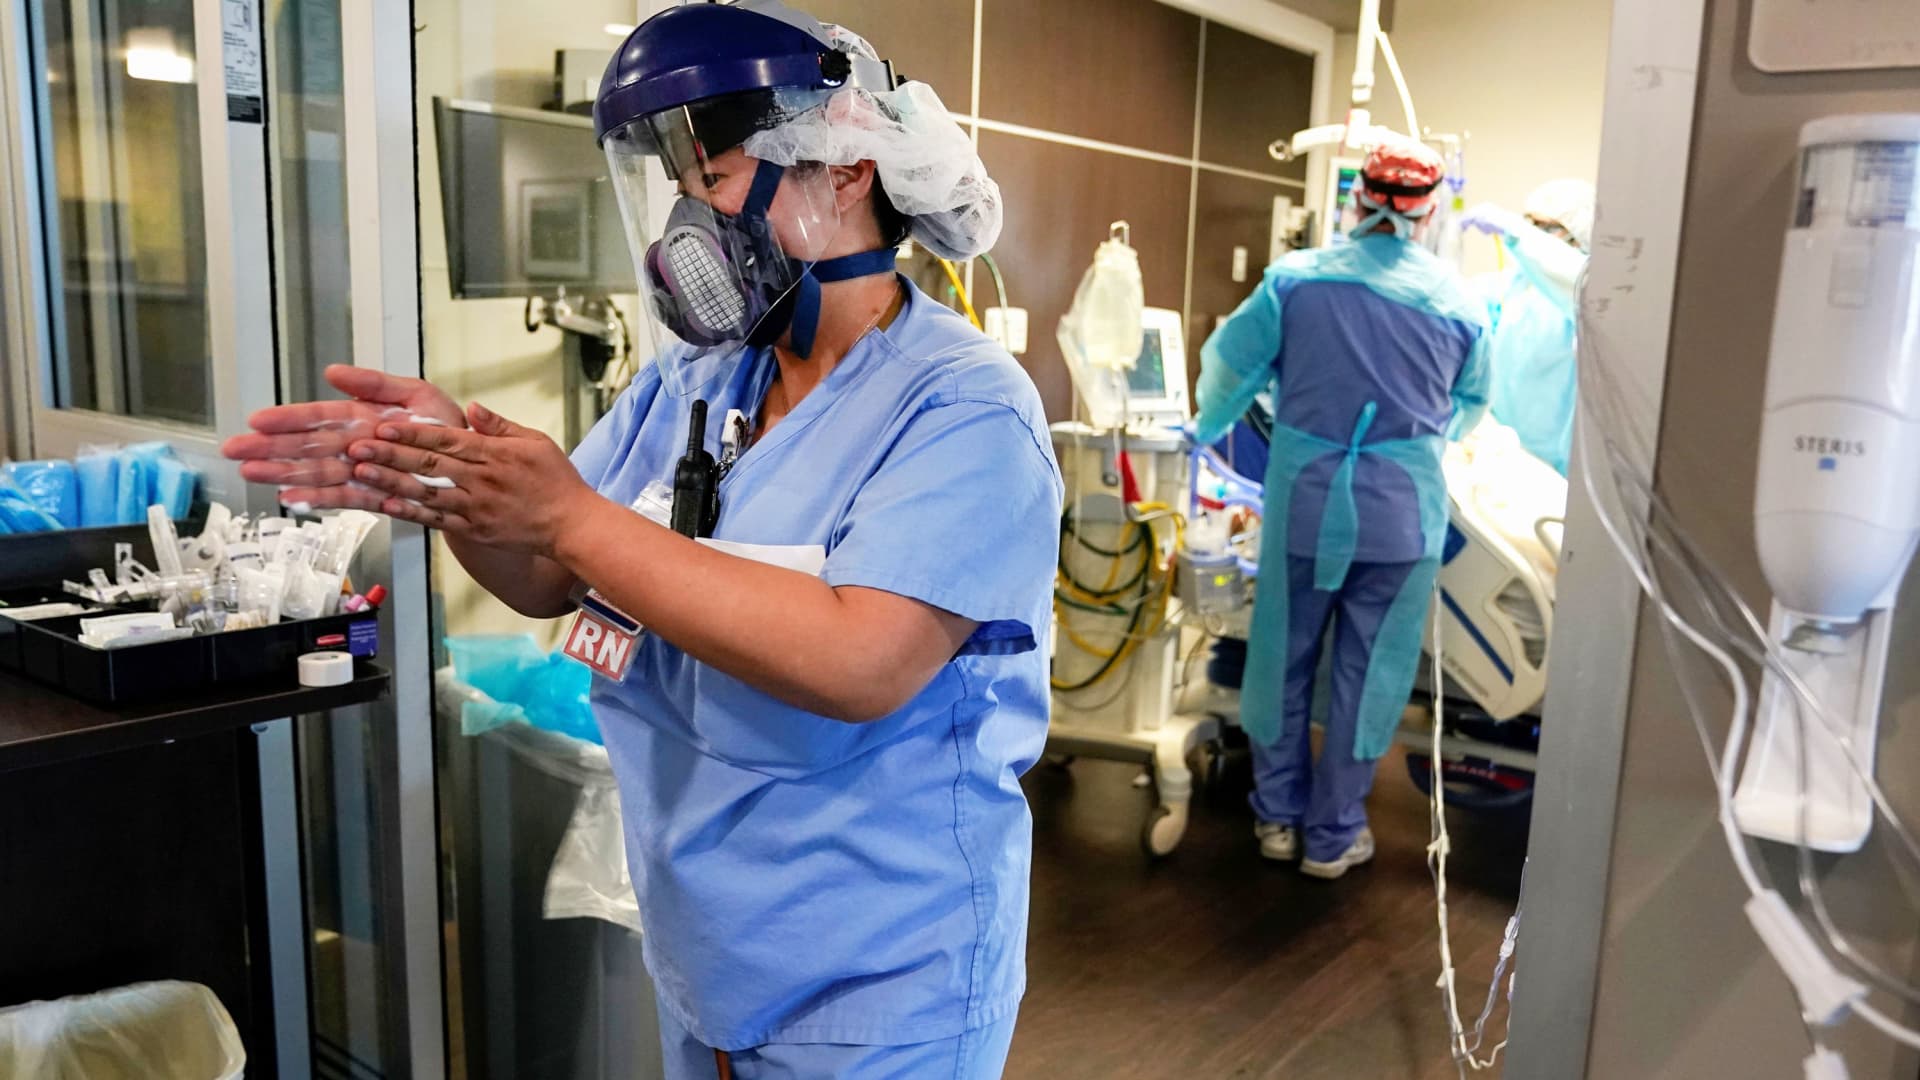 A nurse sanitizes her hands as she leaves a coronavirus disease (COVID-19) patients room in the ICU at SSM Health St. Anthony Hospital in Oklahoma City, Oklahoma, January 28, 2021.